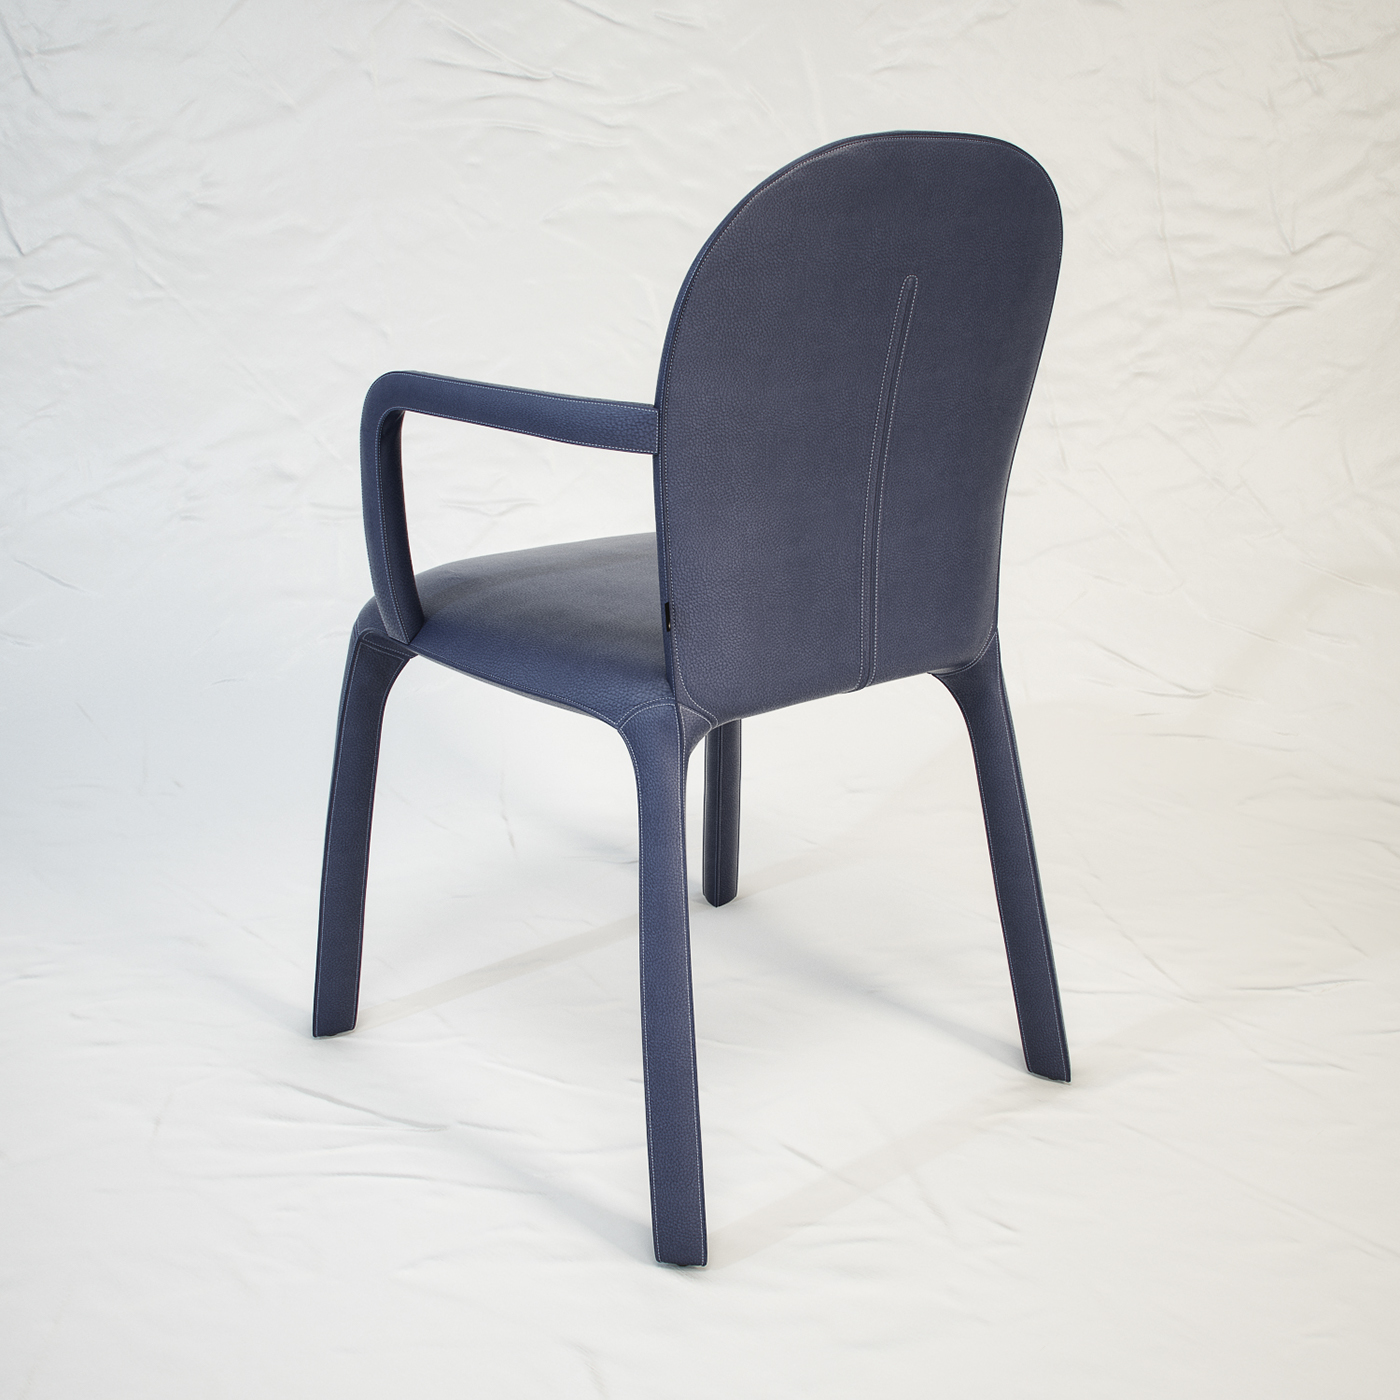 Poltrona Frau amelie chair leather 3D model download